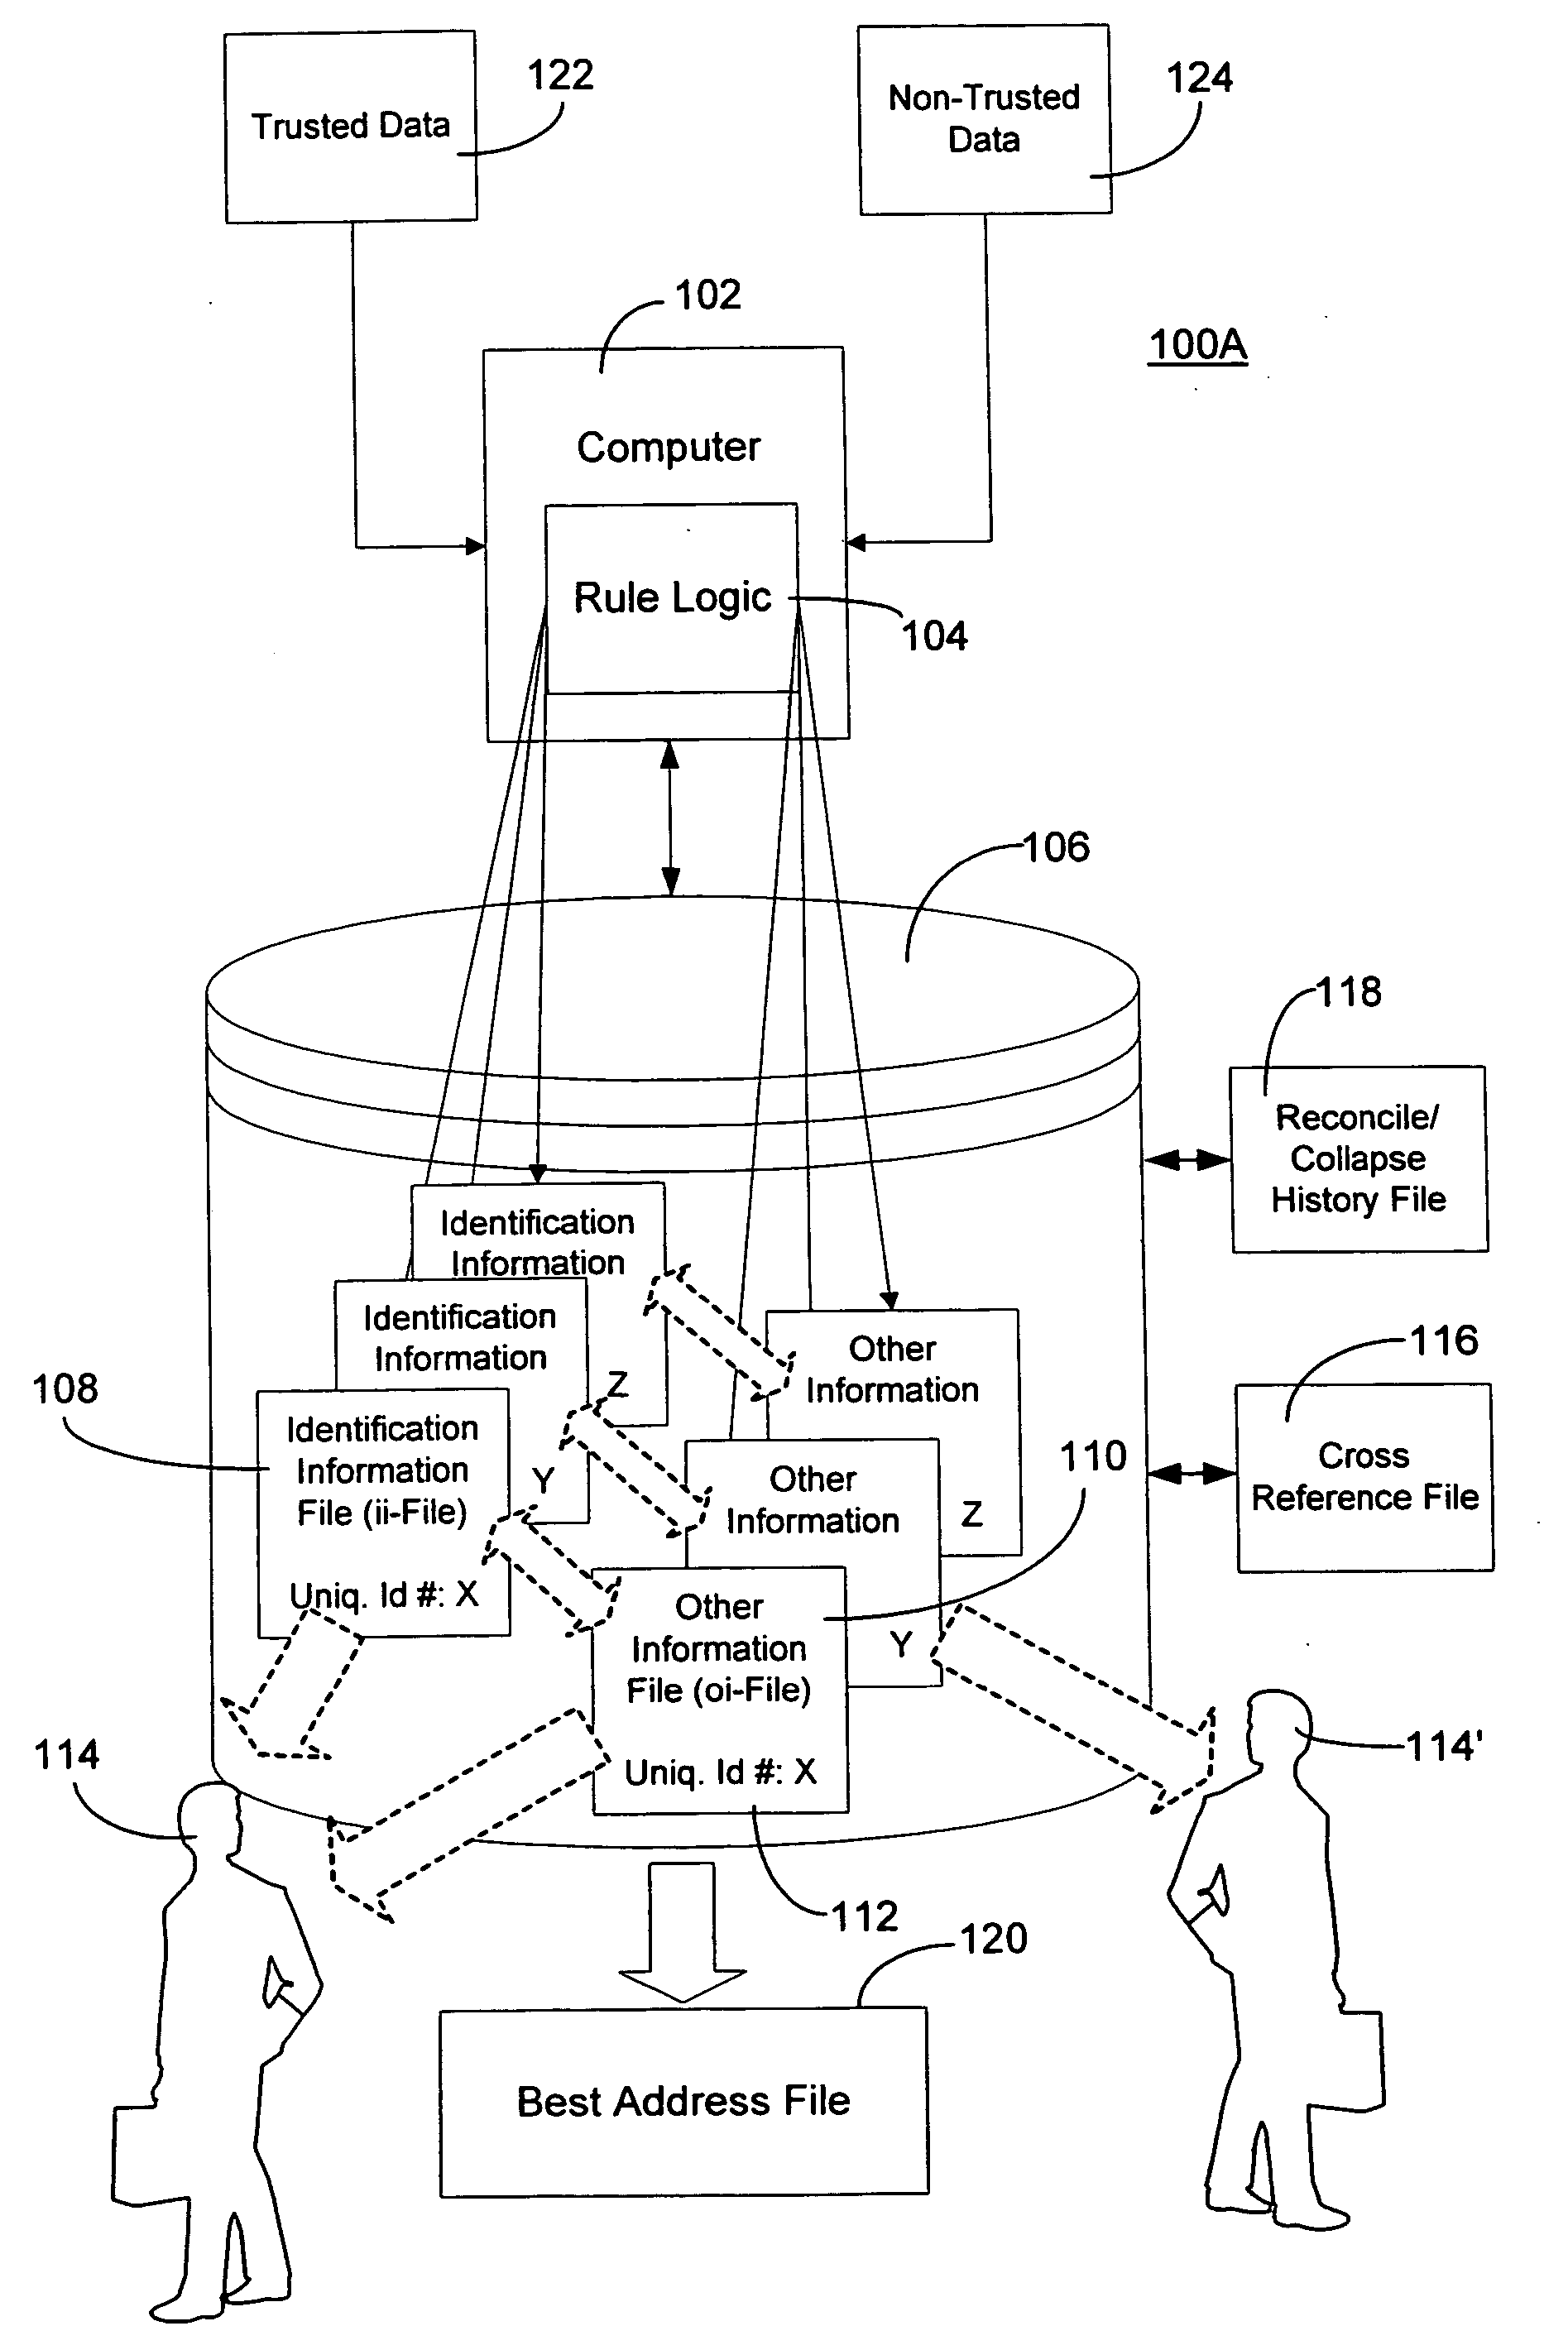 Method and system for creating and maintaining an index for tracking files relating to people